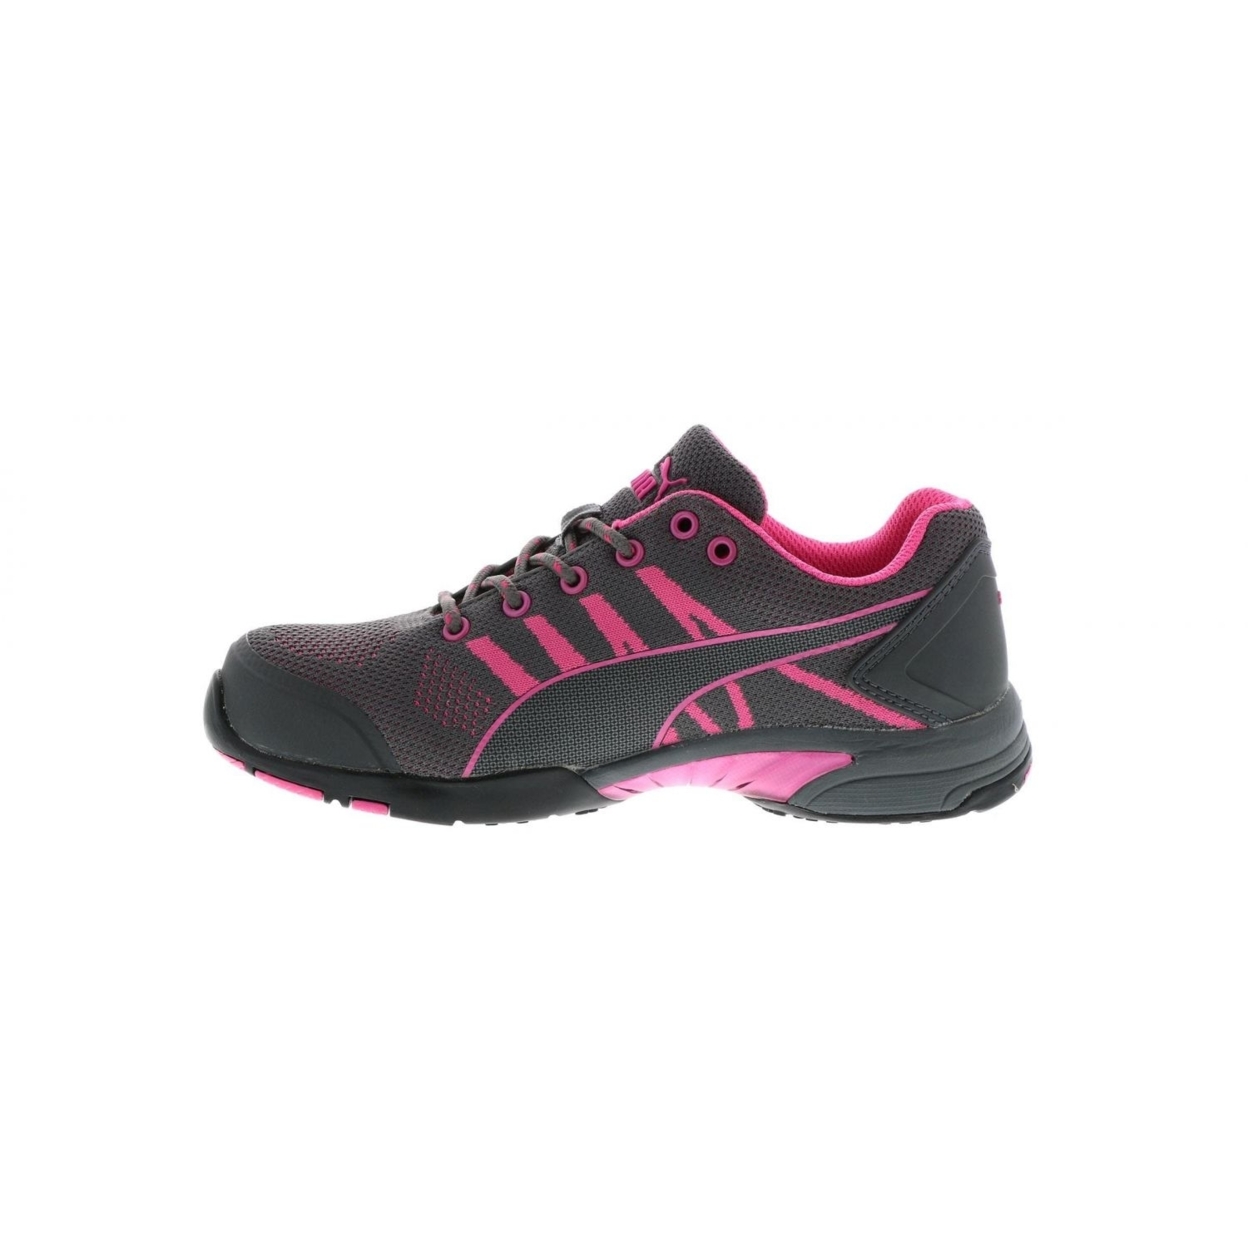 PUMA Safety Women's Celerity Knit Low Steel Toe ESD Work Shoe Pink - 642915 ONE SIZE PINK - PINK, 7